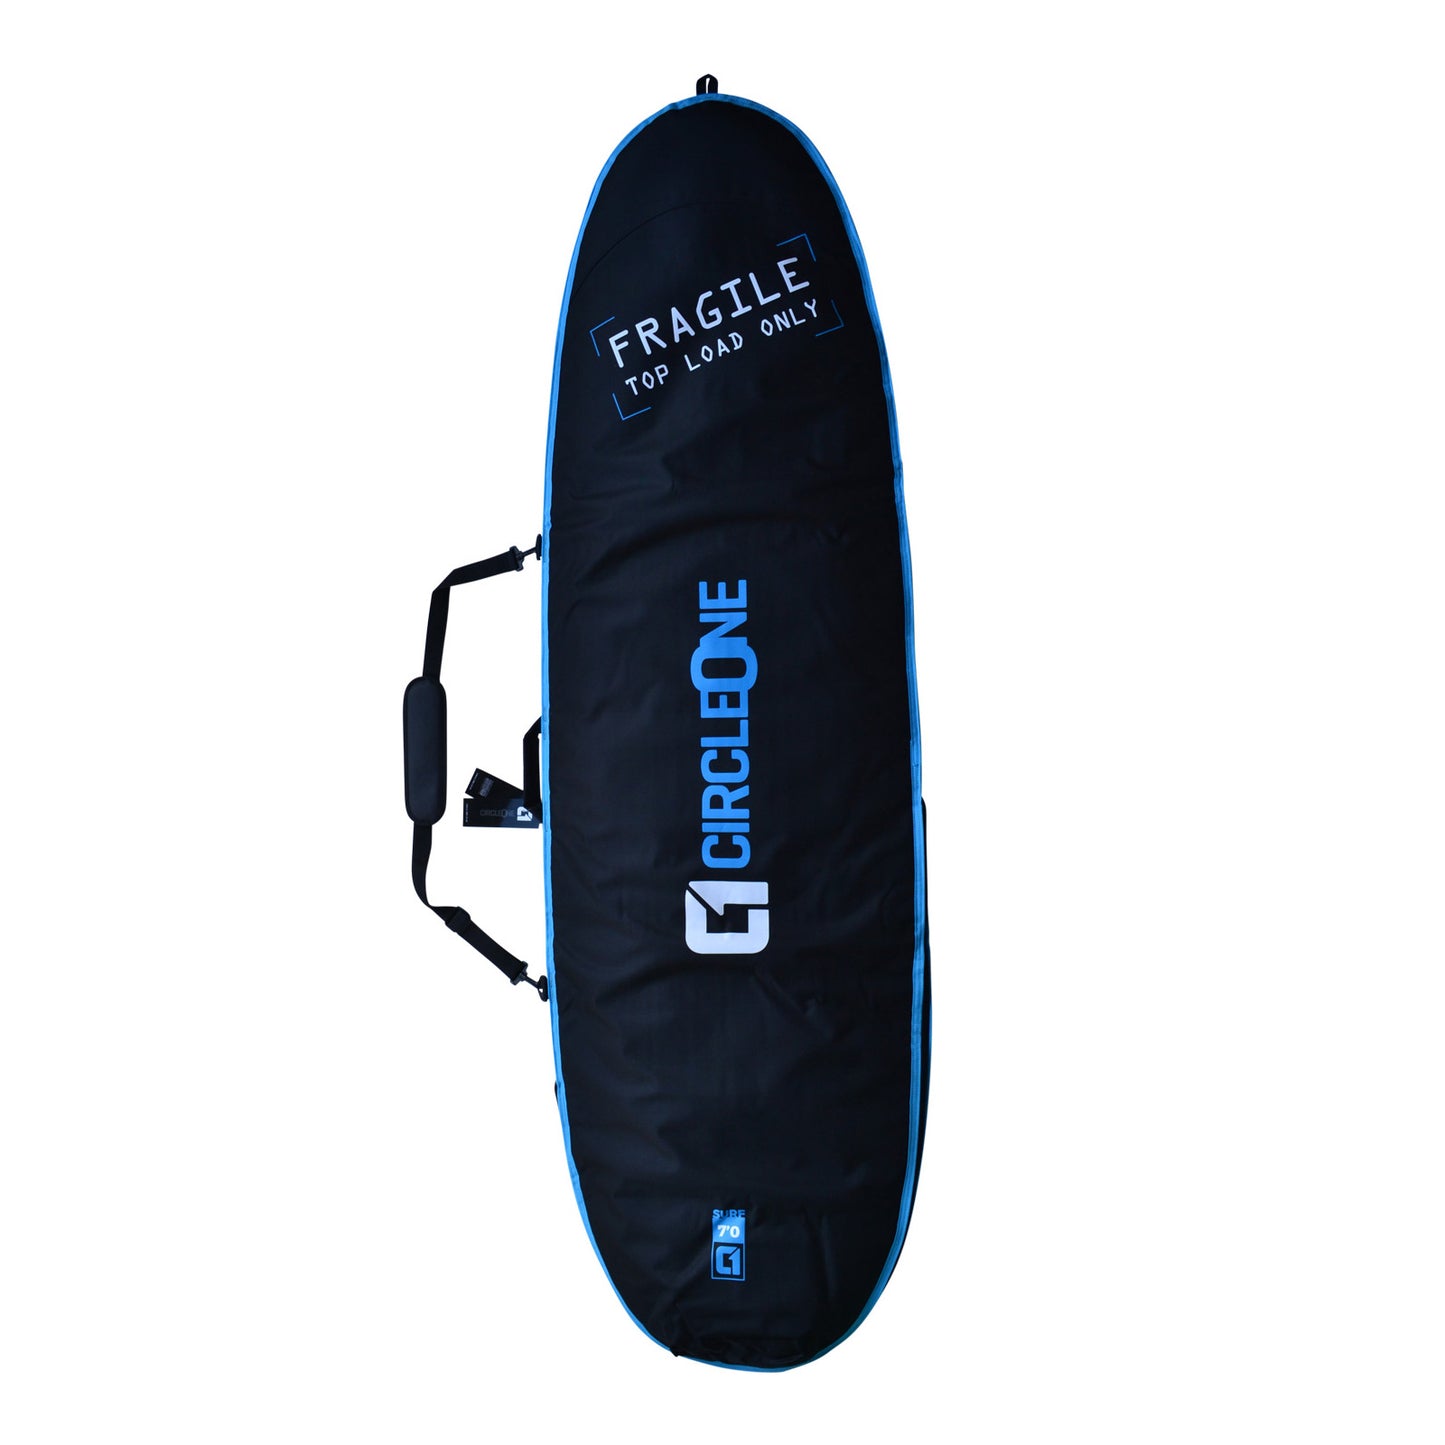 6′ 6″ Bamboo Wing Swallow Tail Surfboard Package – Includes Bag, Leash, Fins & Wax